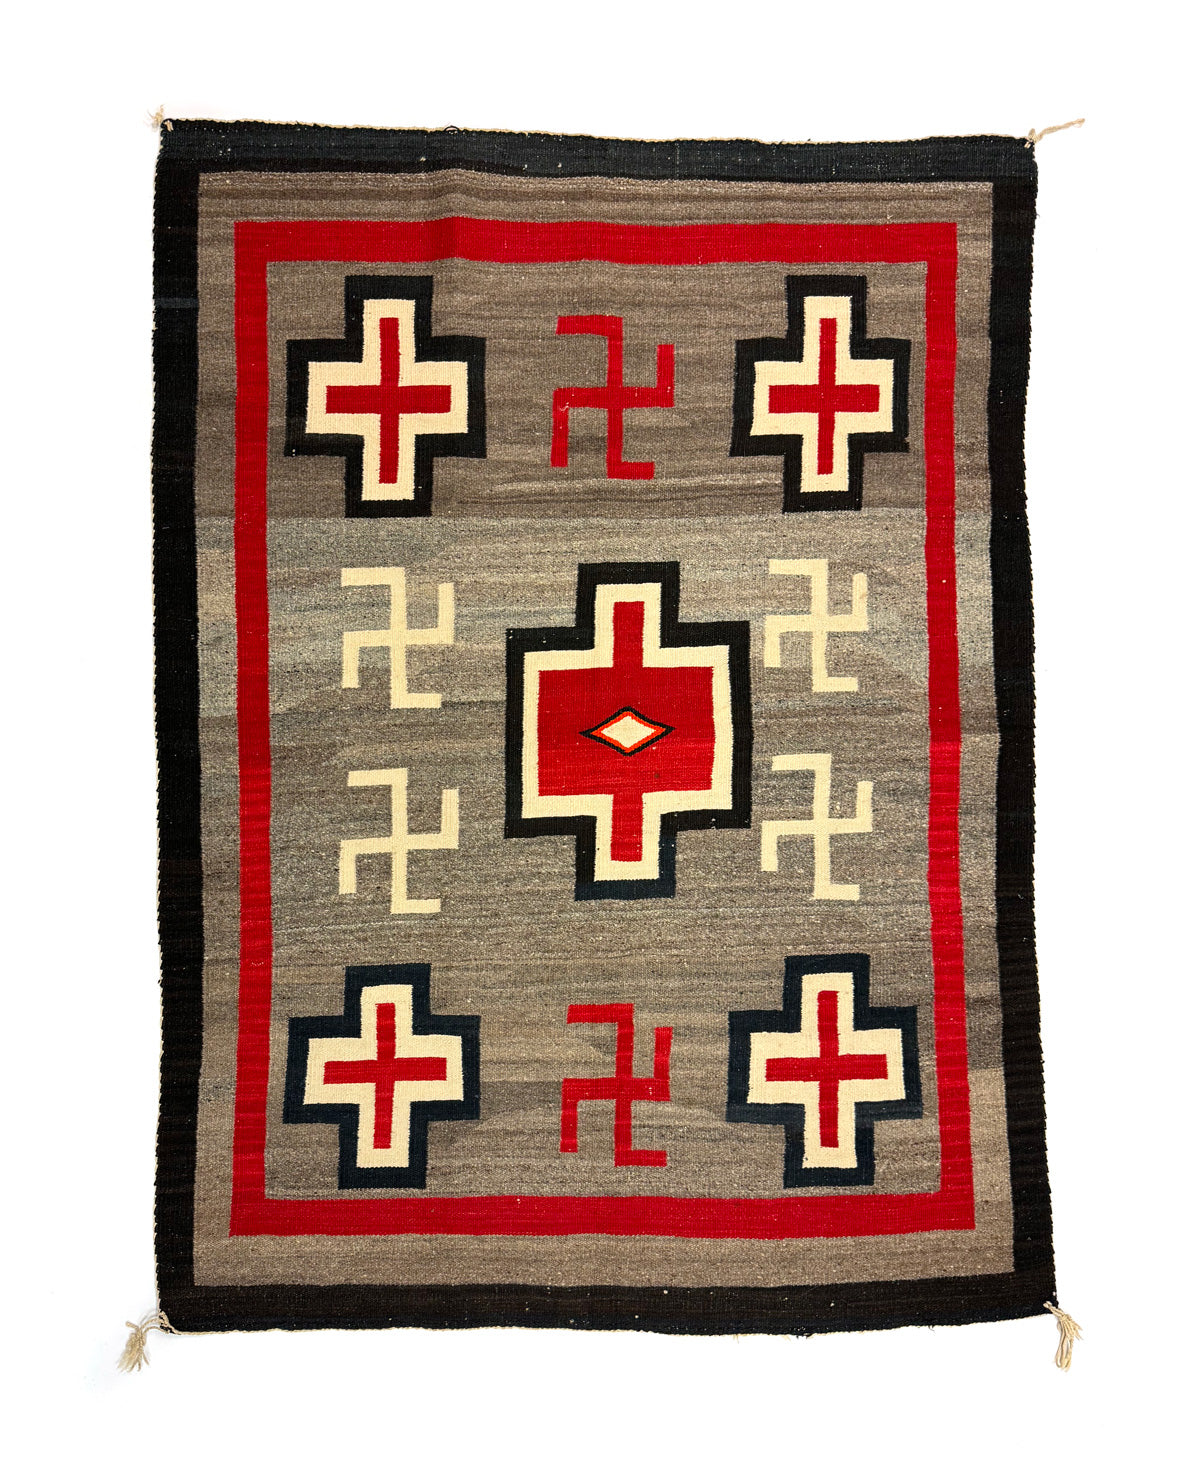 Navajo Ganado Rug with Crosses and Whirling Logs c. 1910-20s, 68" x 51" (T92253-1123-006)